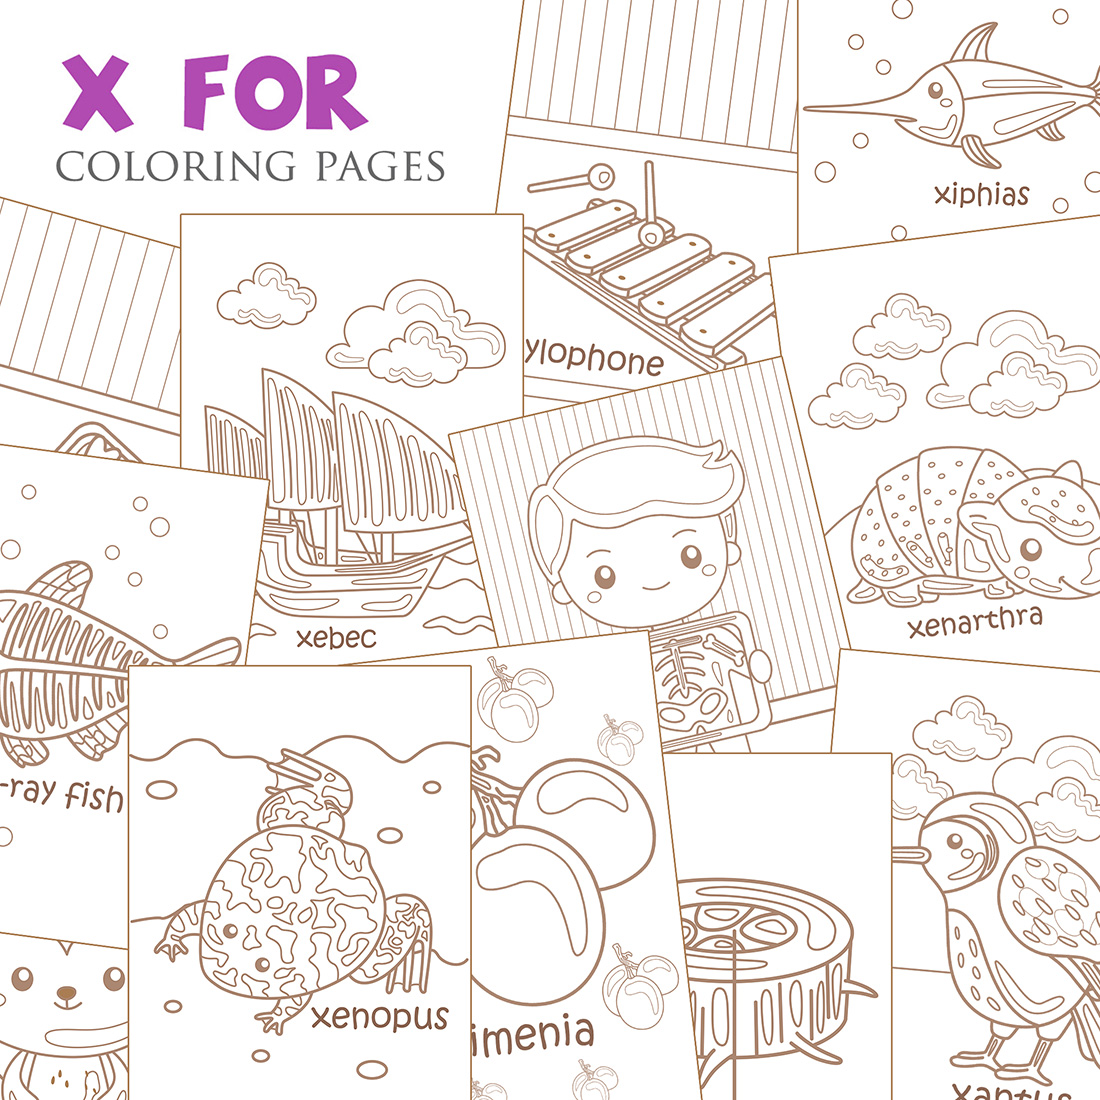 Alphabet X For Vocabulary School Letter Reading Writing Font Study Learning Student Toodler Kids Xylem Ximenia Xray Kids Xray Fish Xylophone Xenarthra Xebec Xantus Xenopus Xiphias Xerus Xouba Lesson Cartoon Coloring Pages For Kids and Adult cover image.